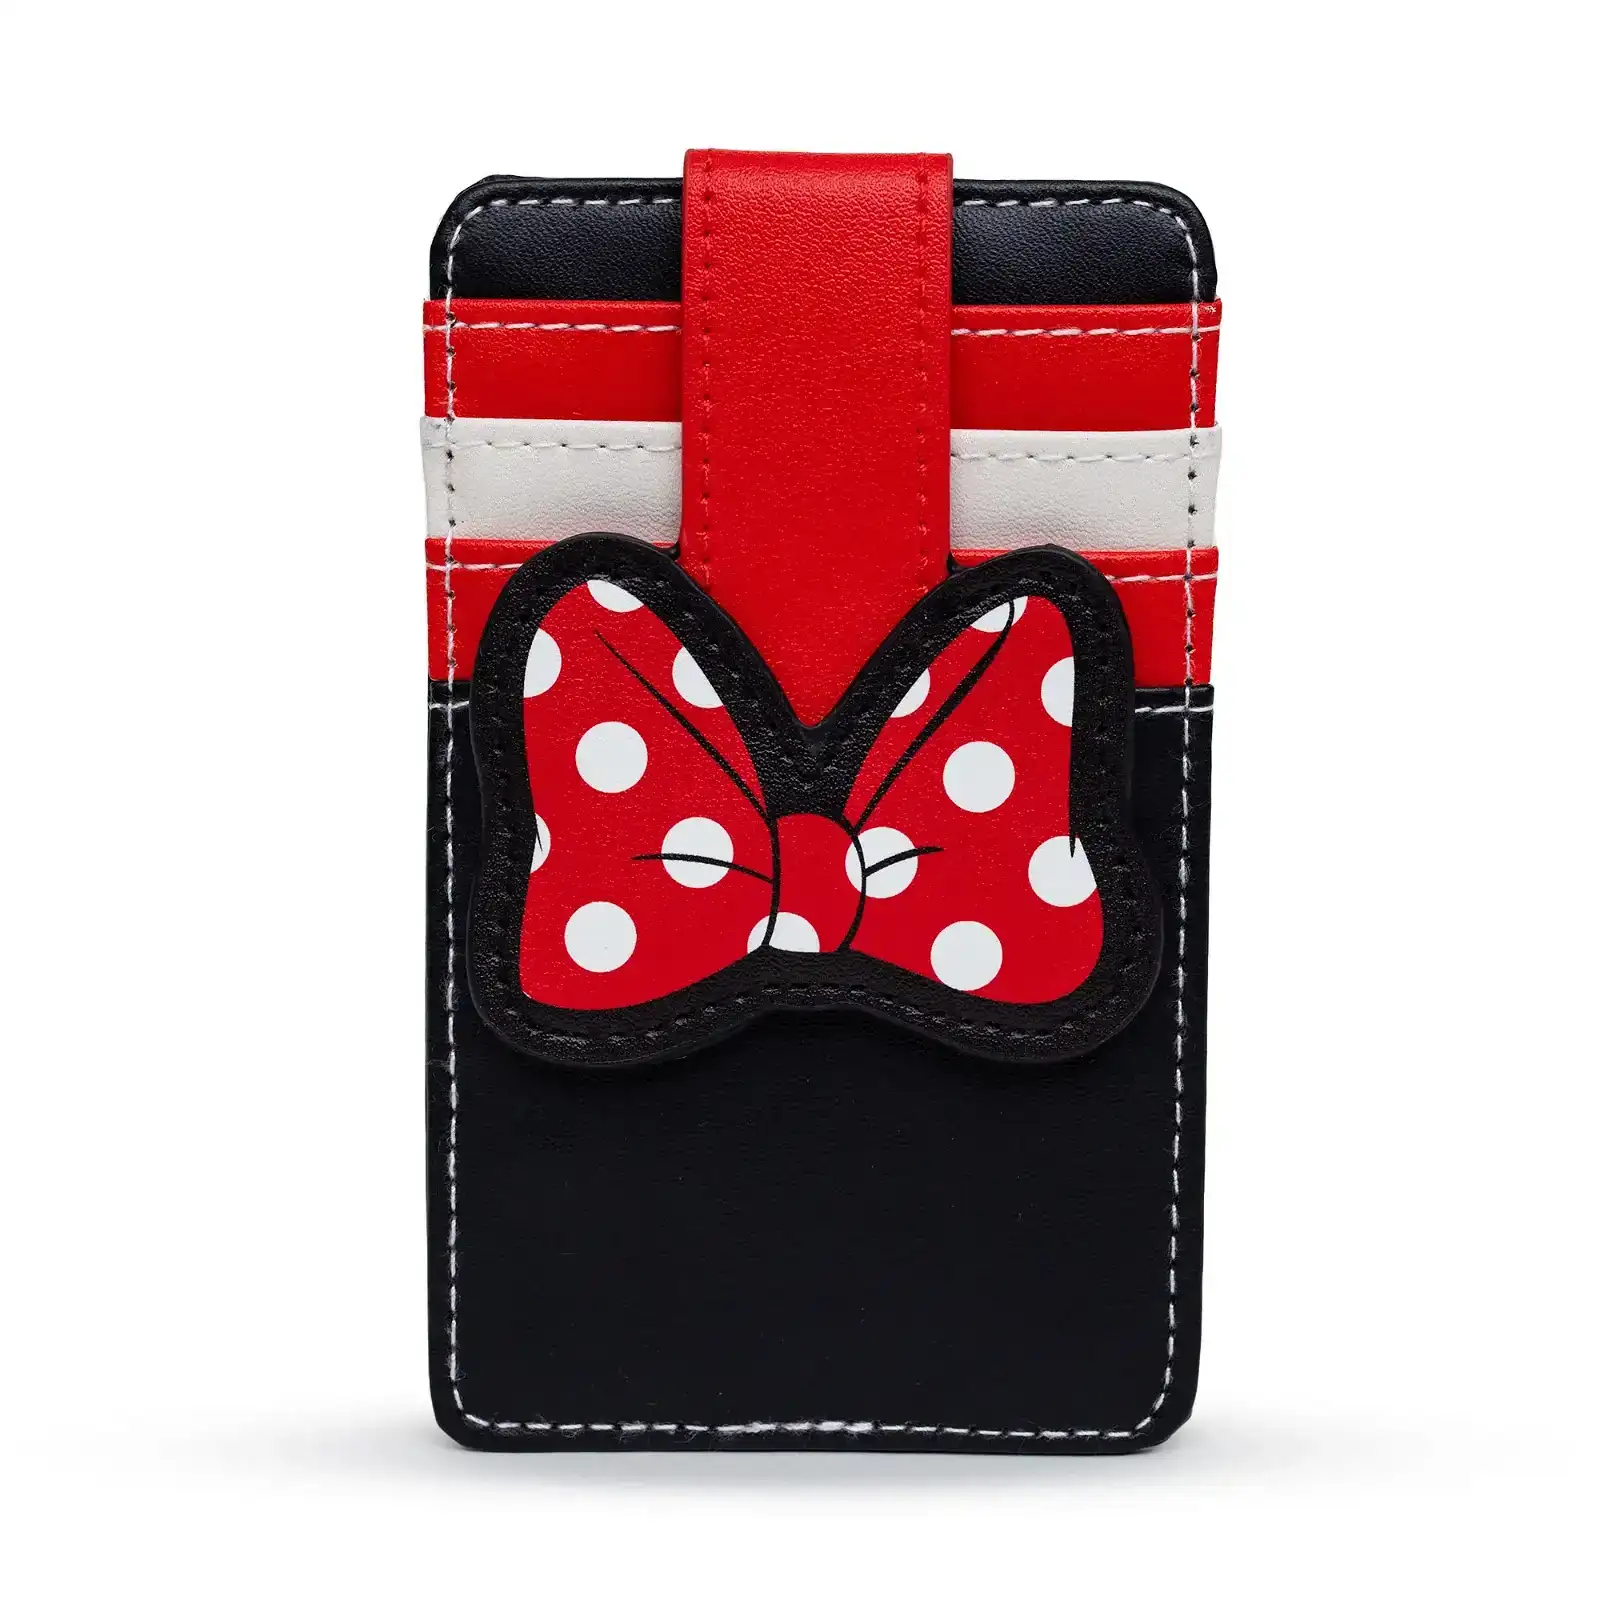 Image of Disney Wallet, Character Wallet ID Card Holder, Minnie Mouse Bow Red Black White, Vegan Leather